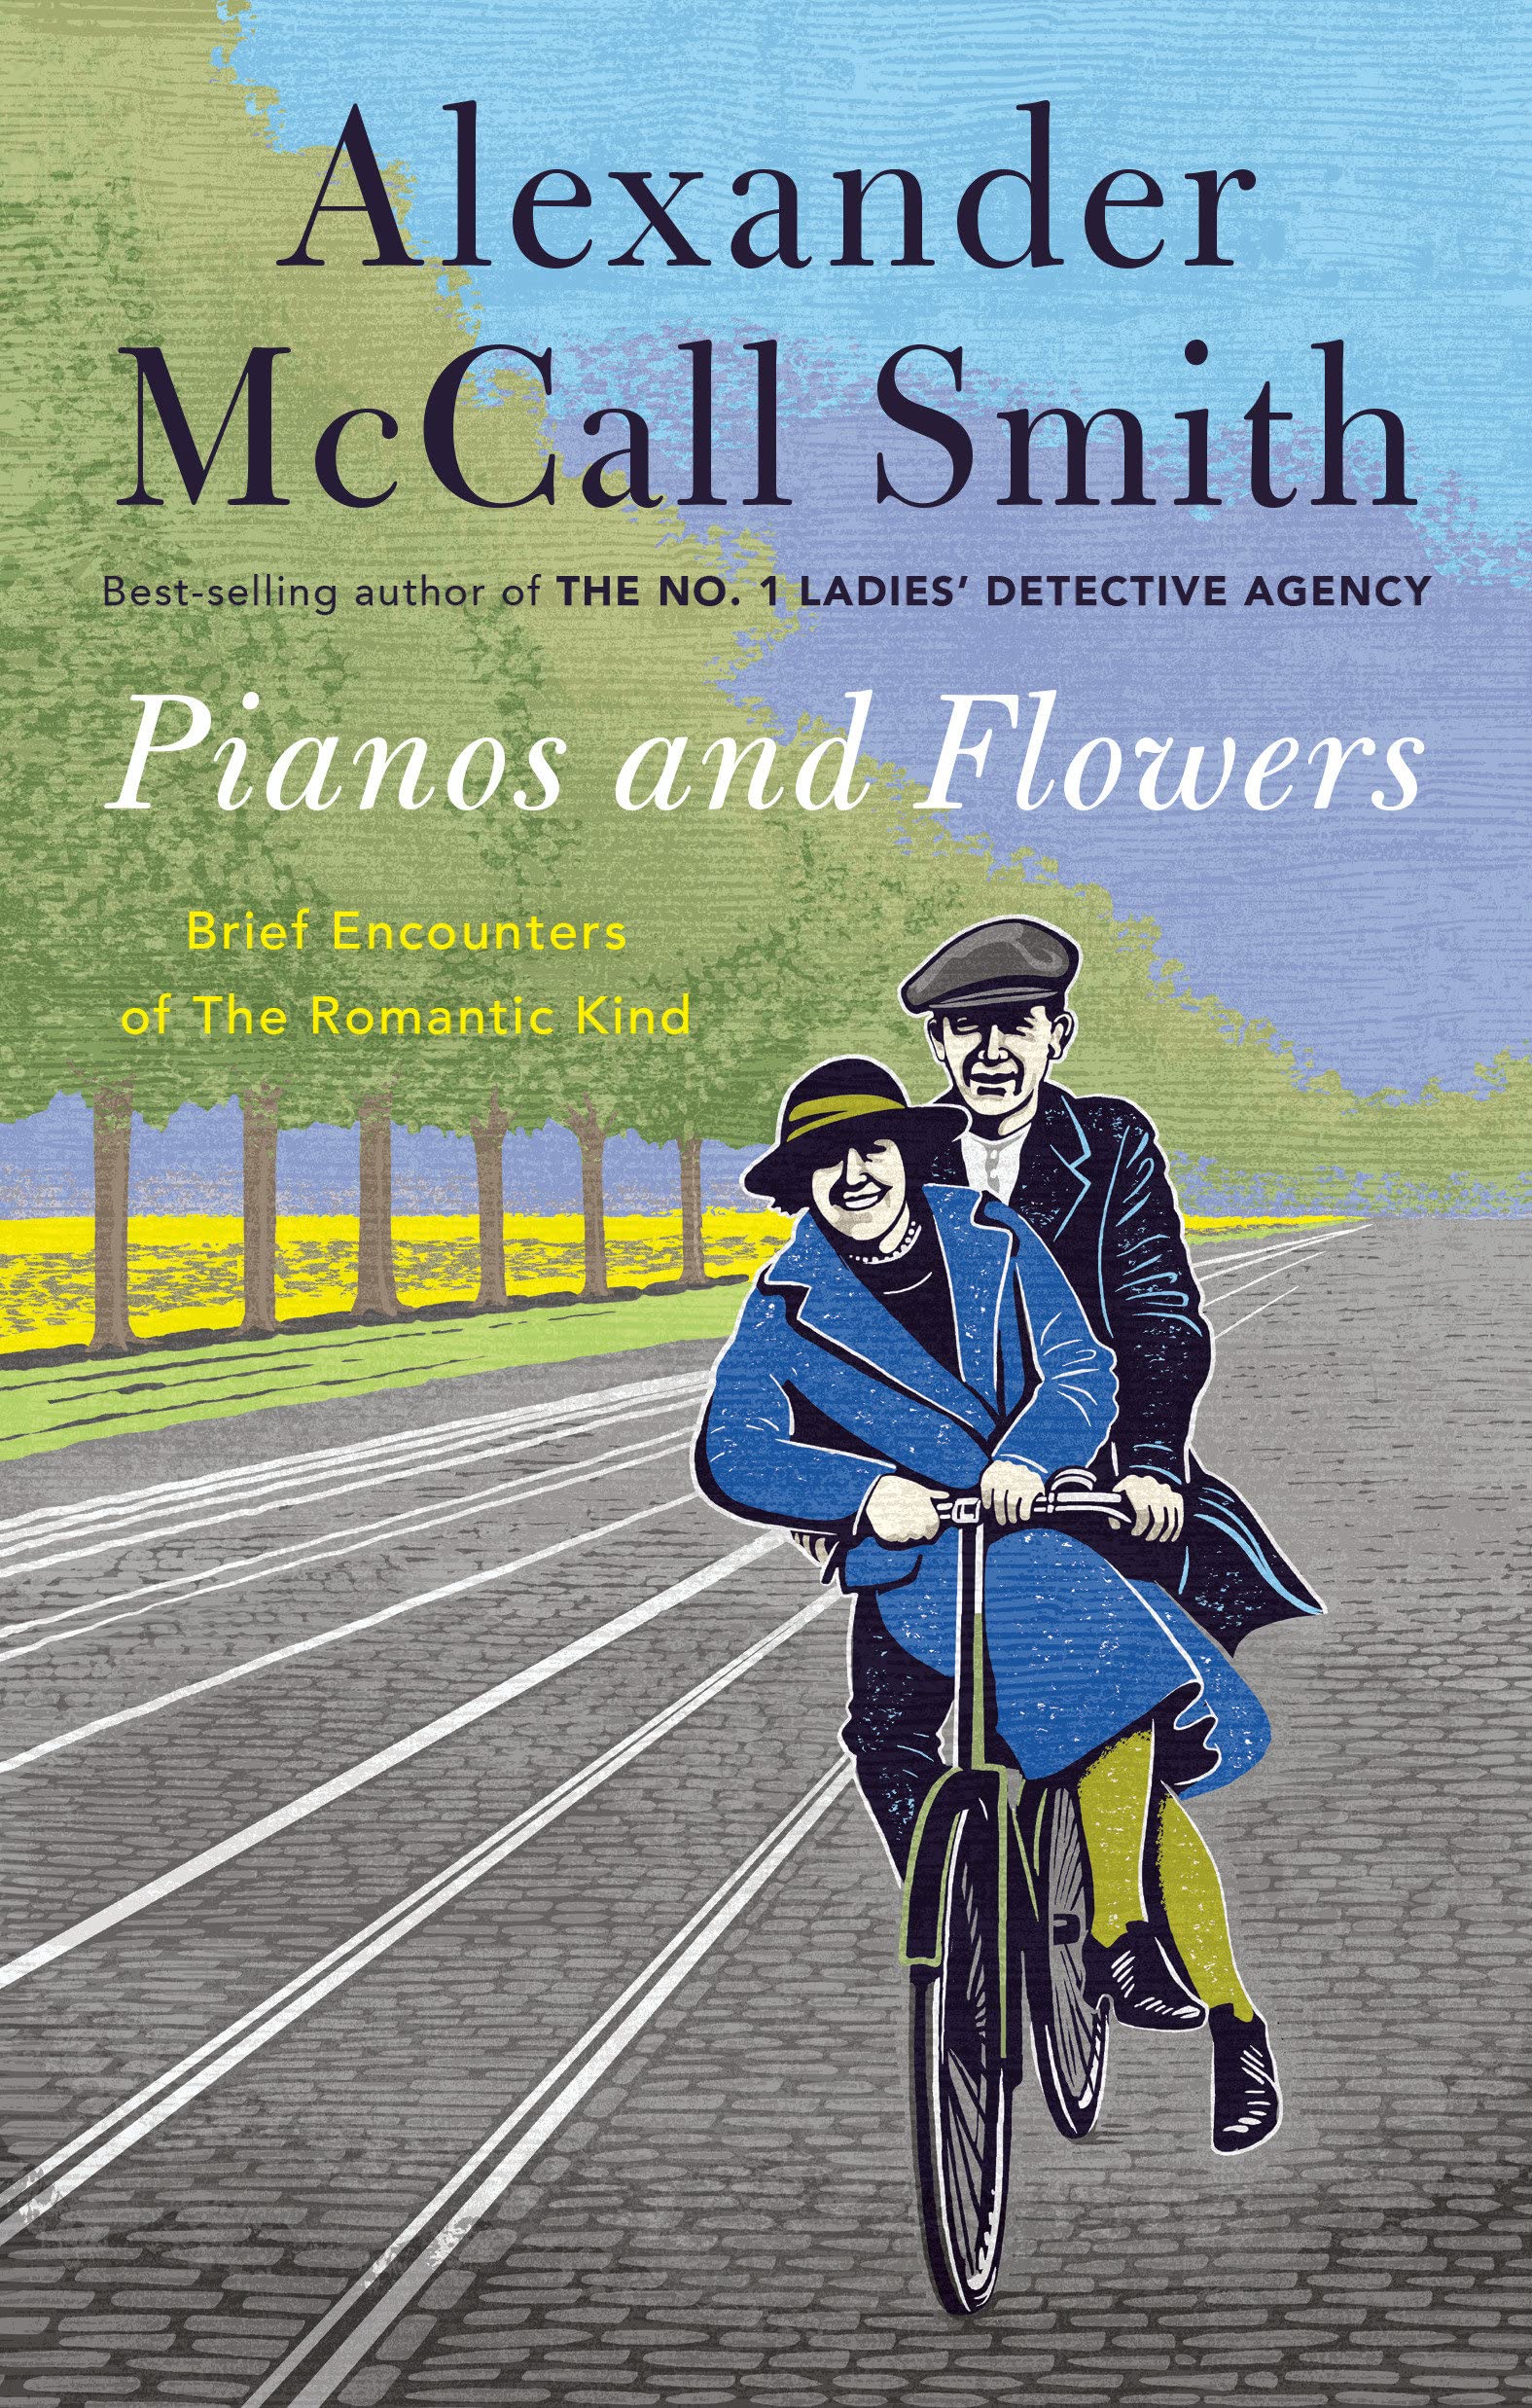 Pianos and Flowers: Brief Encounters of the Romantic Kind Hardcover by Alexander McCall Smith